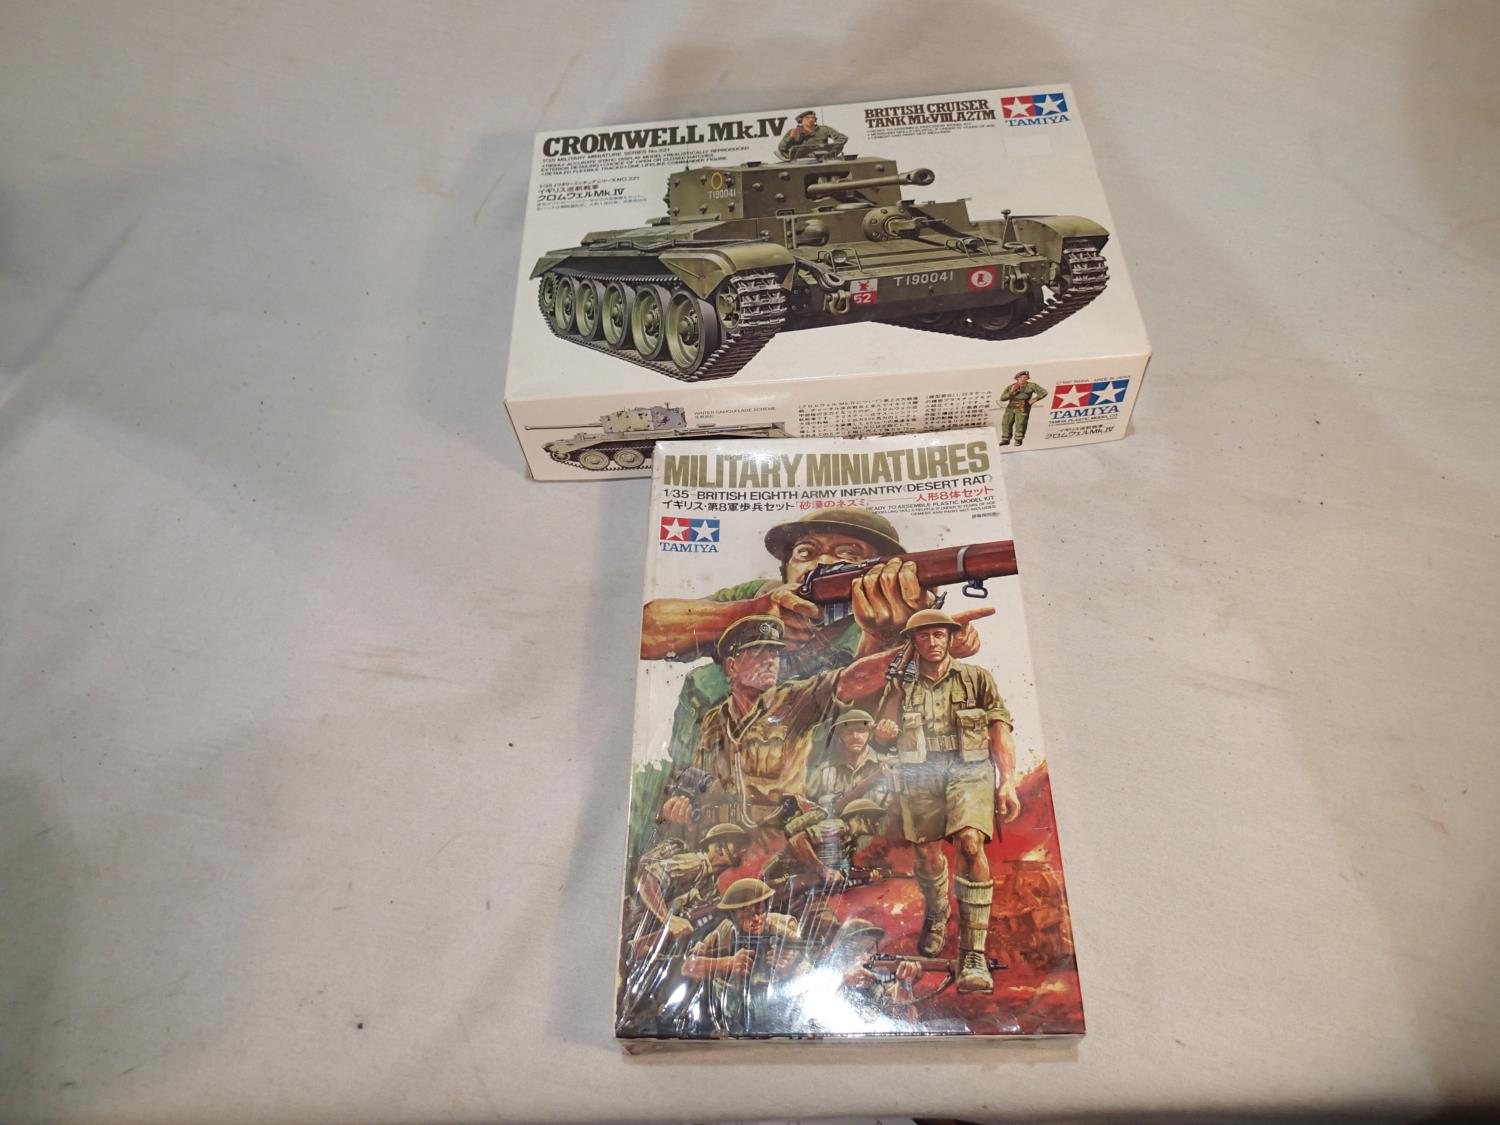 Two 1/35 scale military related Tamiya kits, Cromwell Ink IV tank and Desert Rats soldiers, appear